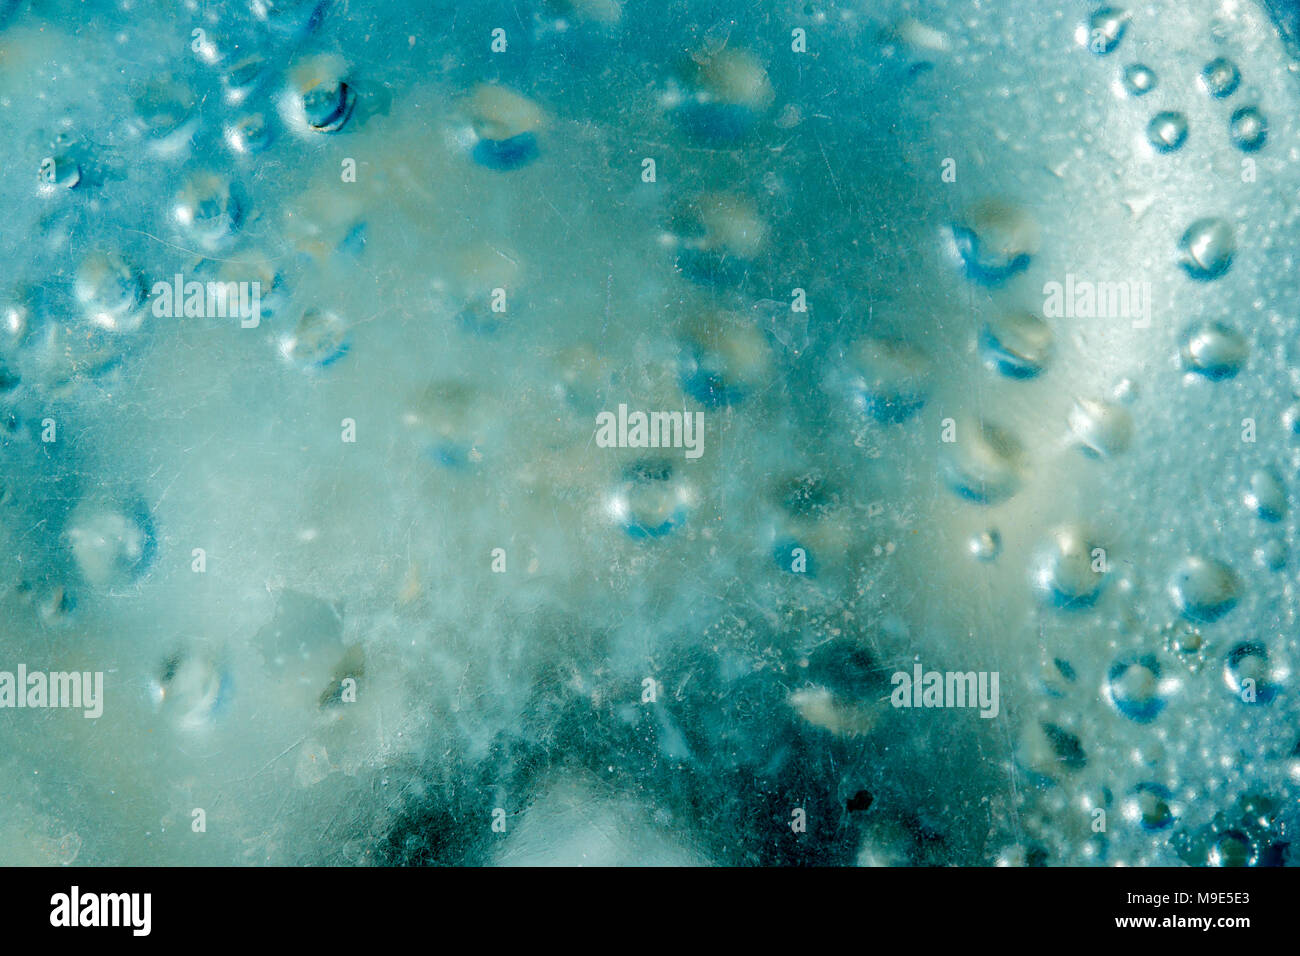 Texture of thick glass of a blue color, grunge, heavily scratched with a drops of condensed water vapor under the surface. Ground lamp abstract Stock Photo